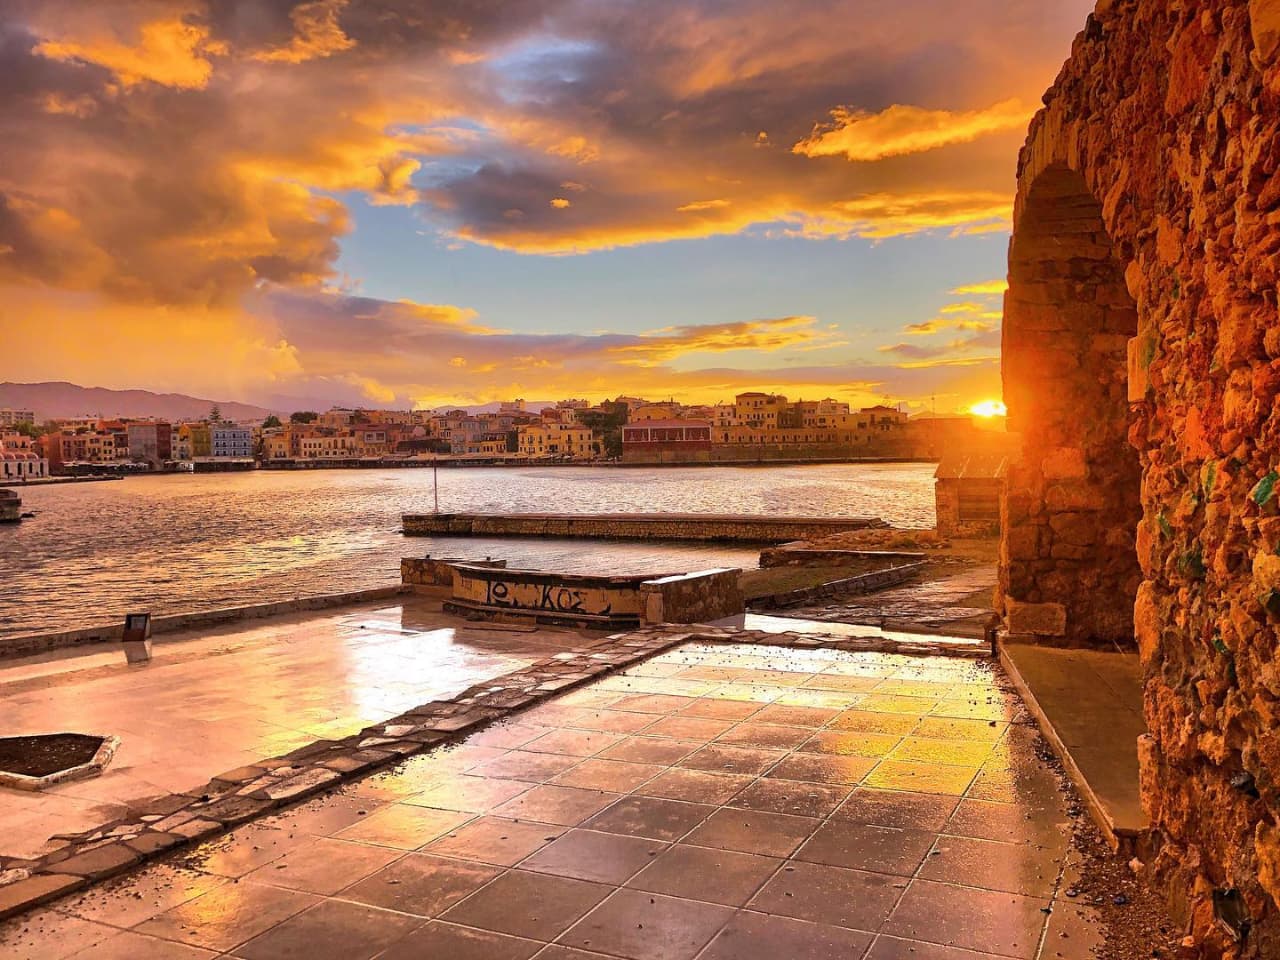 chania travel guide, chania city, hania town, chania things to do, chania hotels, chania where to stay, chania what to do, best sites chania town, chania history museums, chania gastronomy, chania travel tips